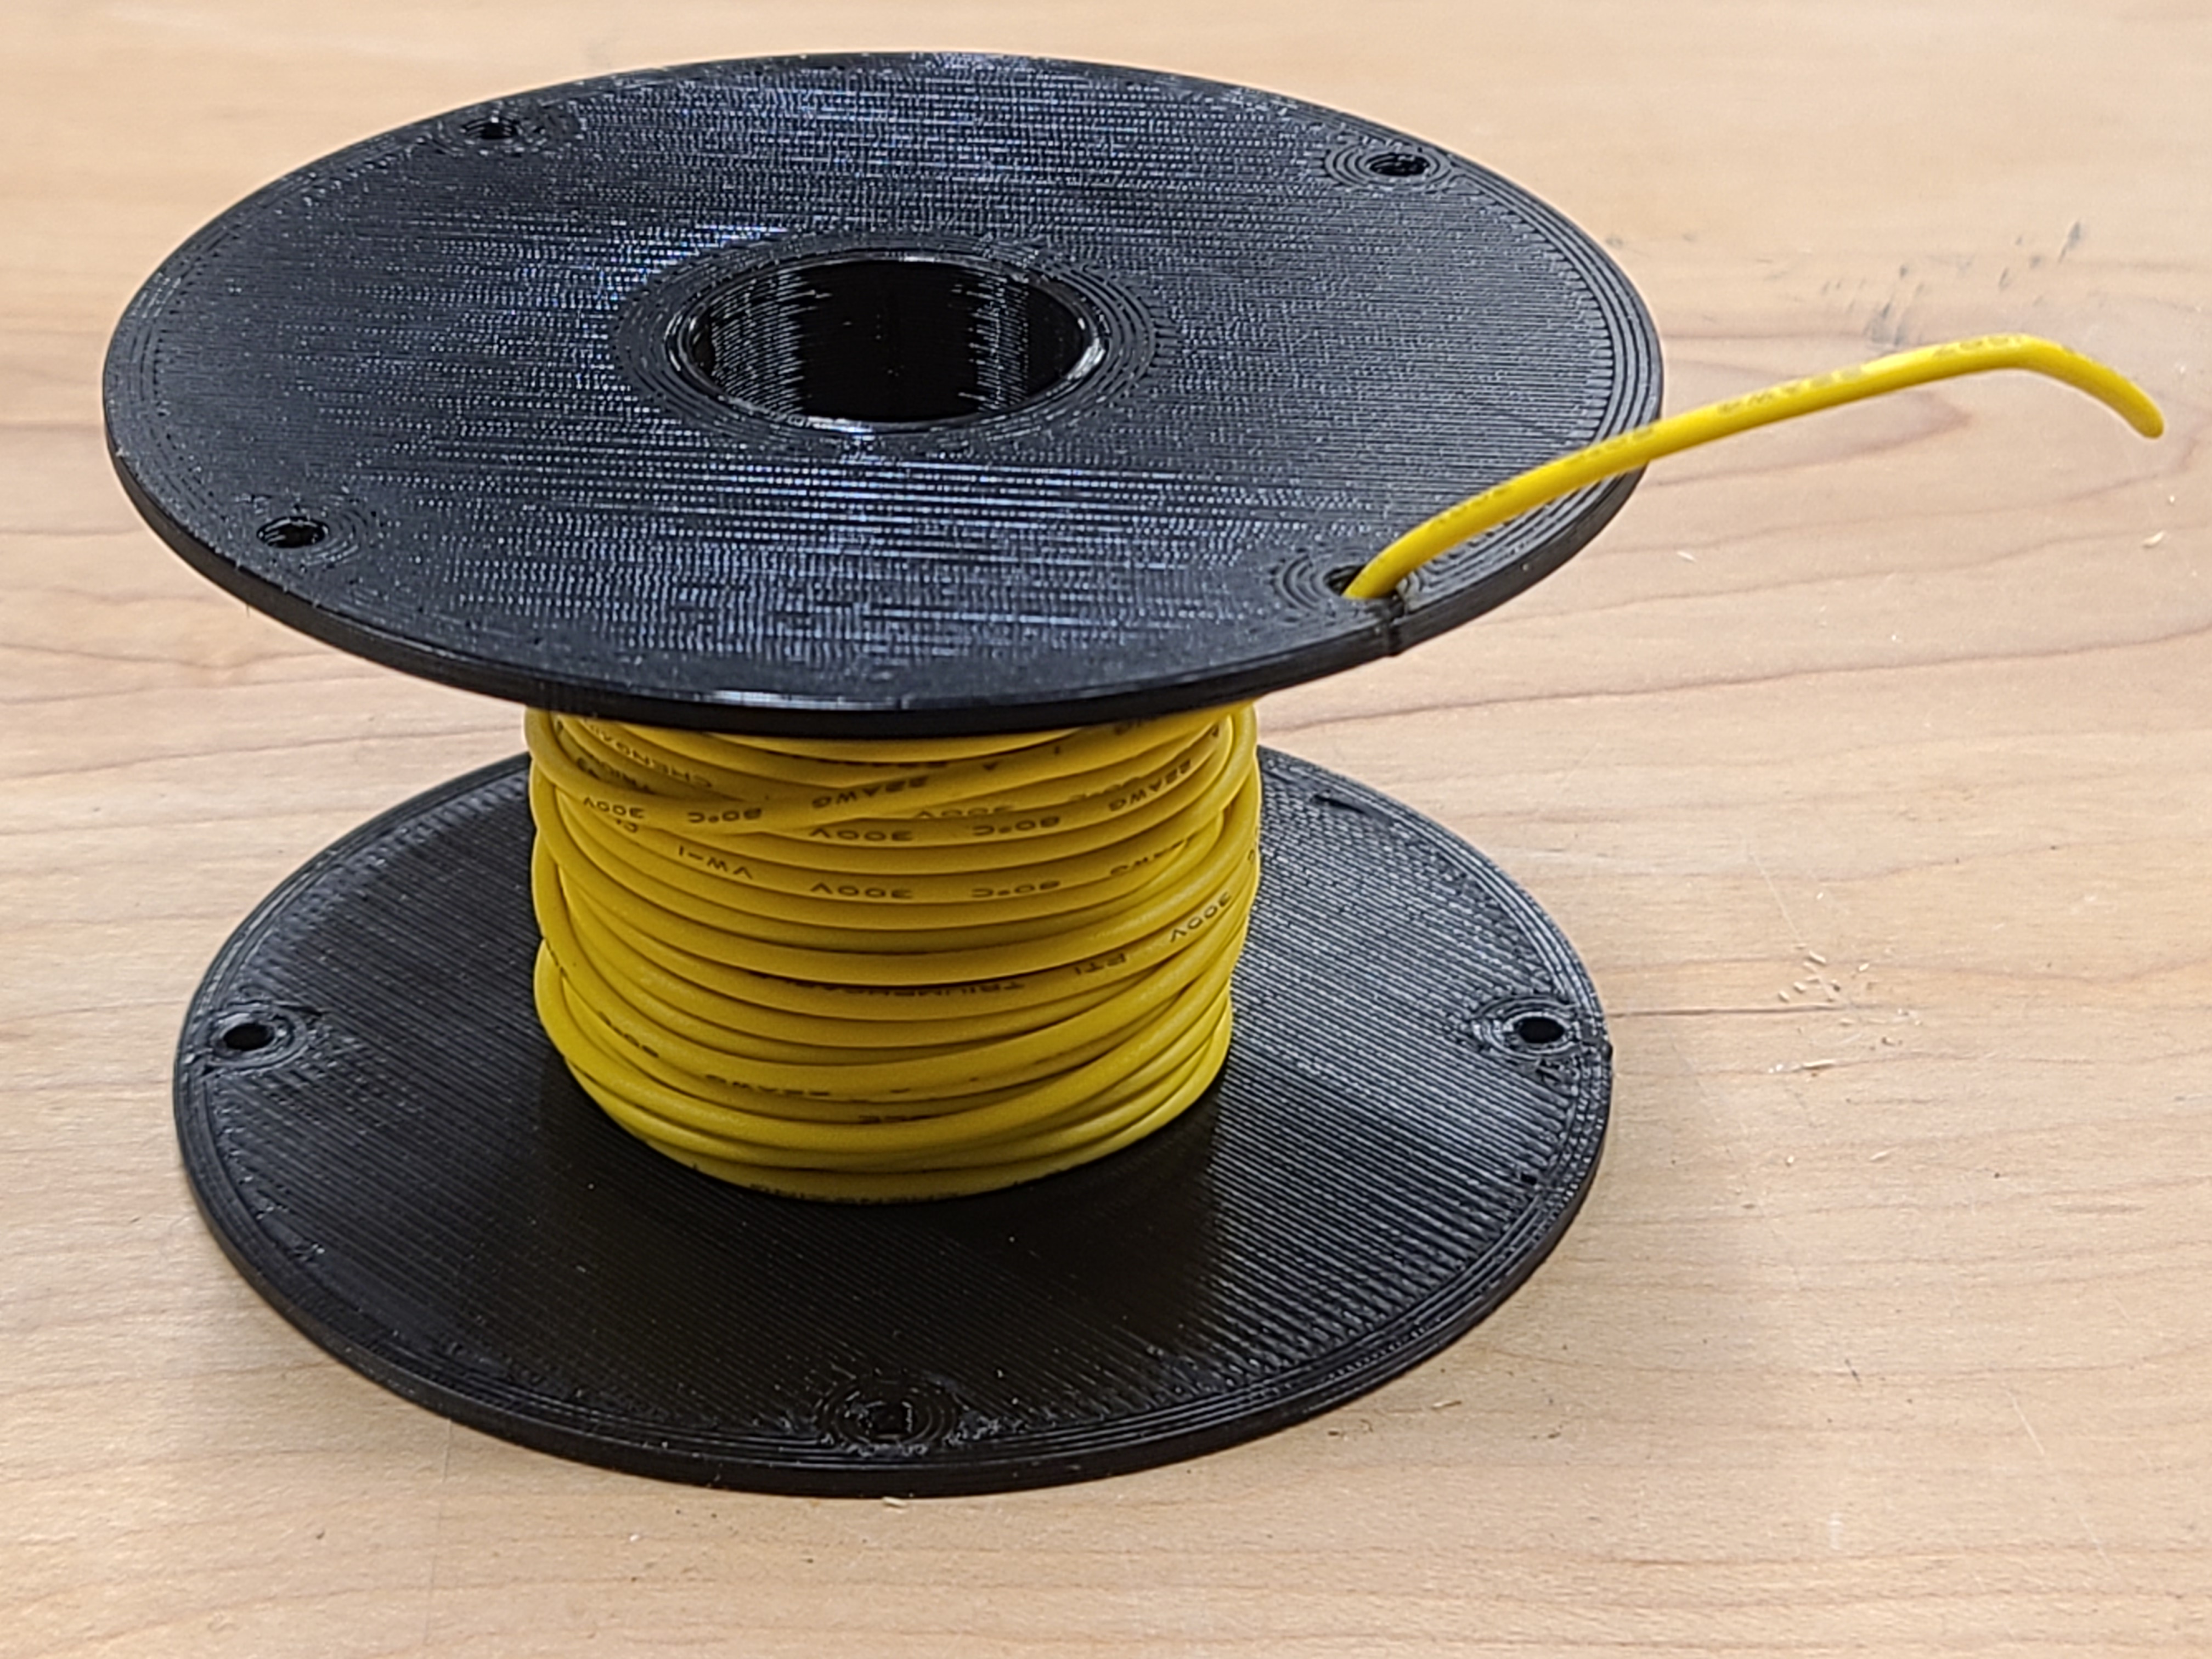 Electrical Wire Spools with Customizable Generator